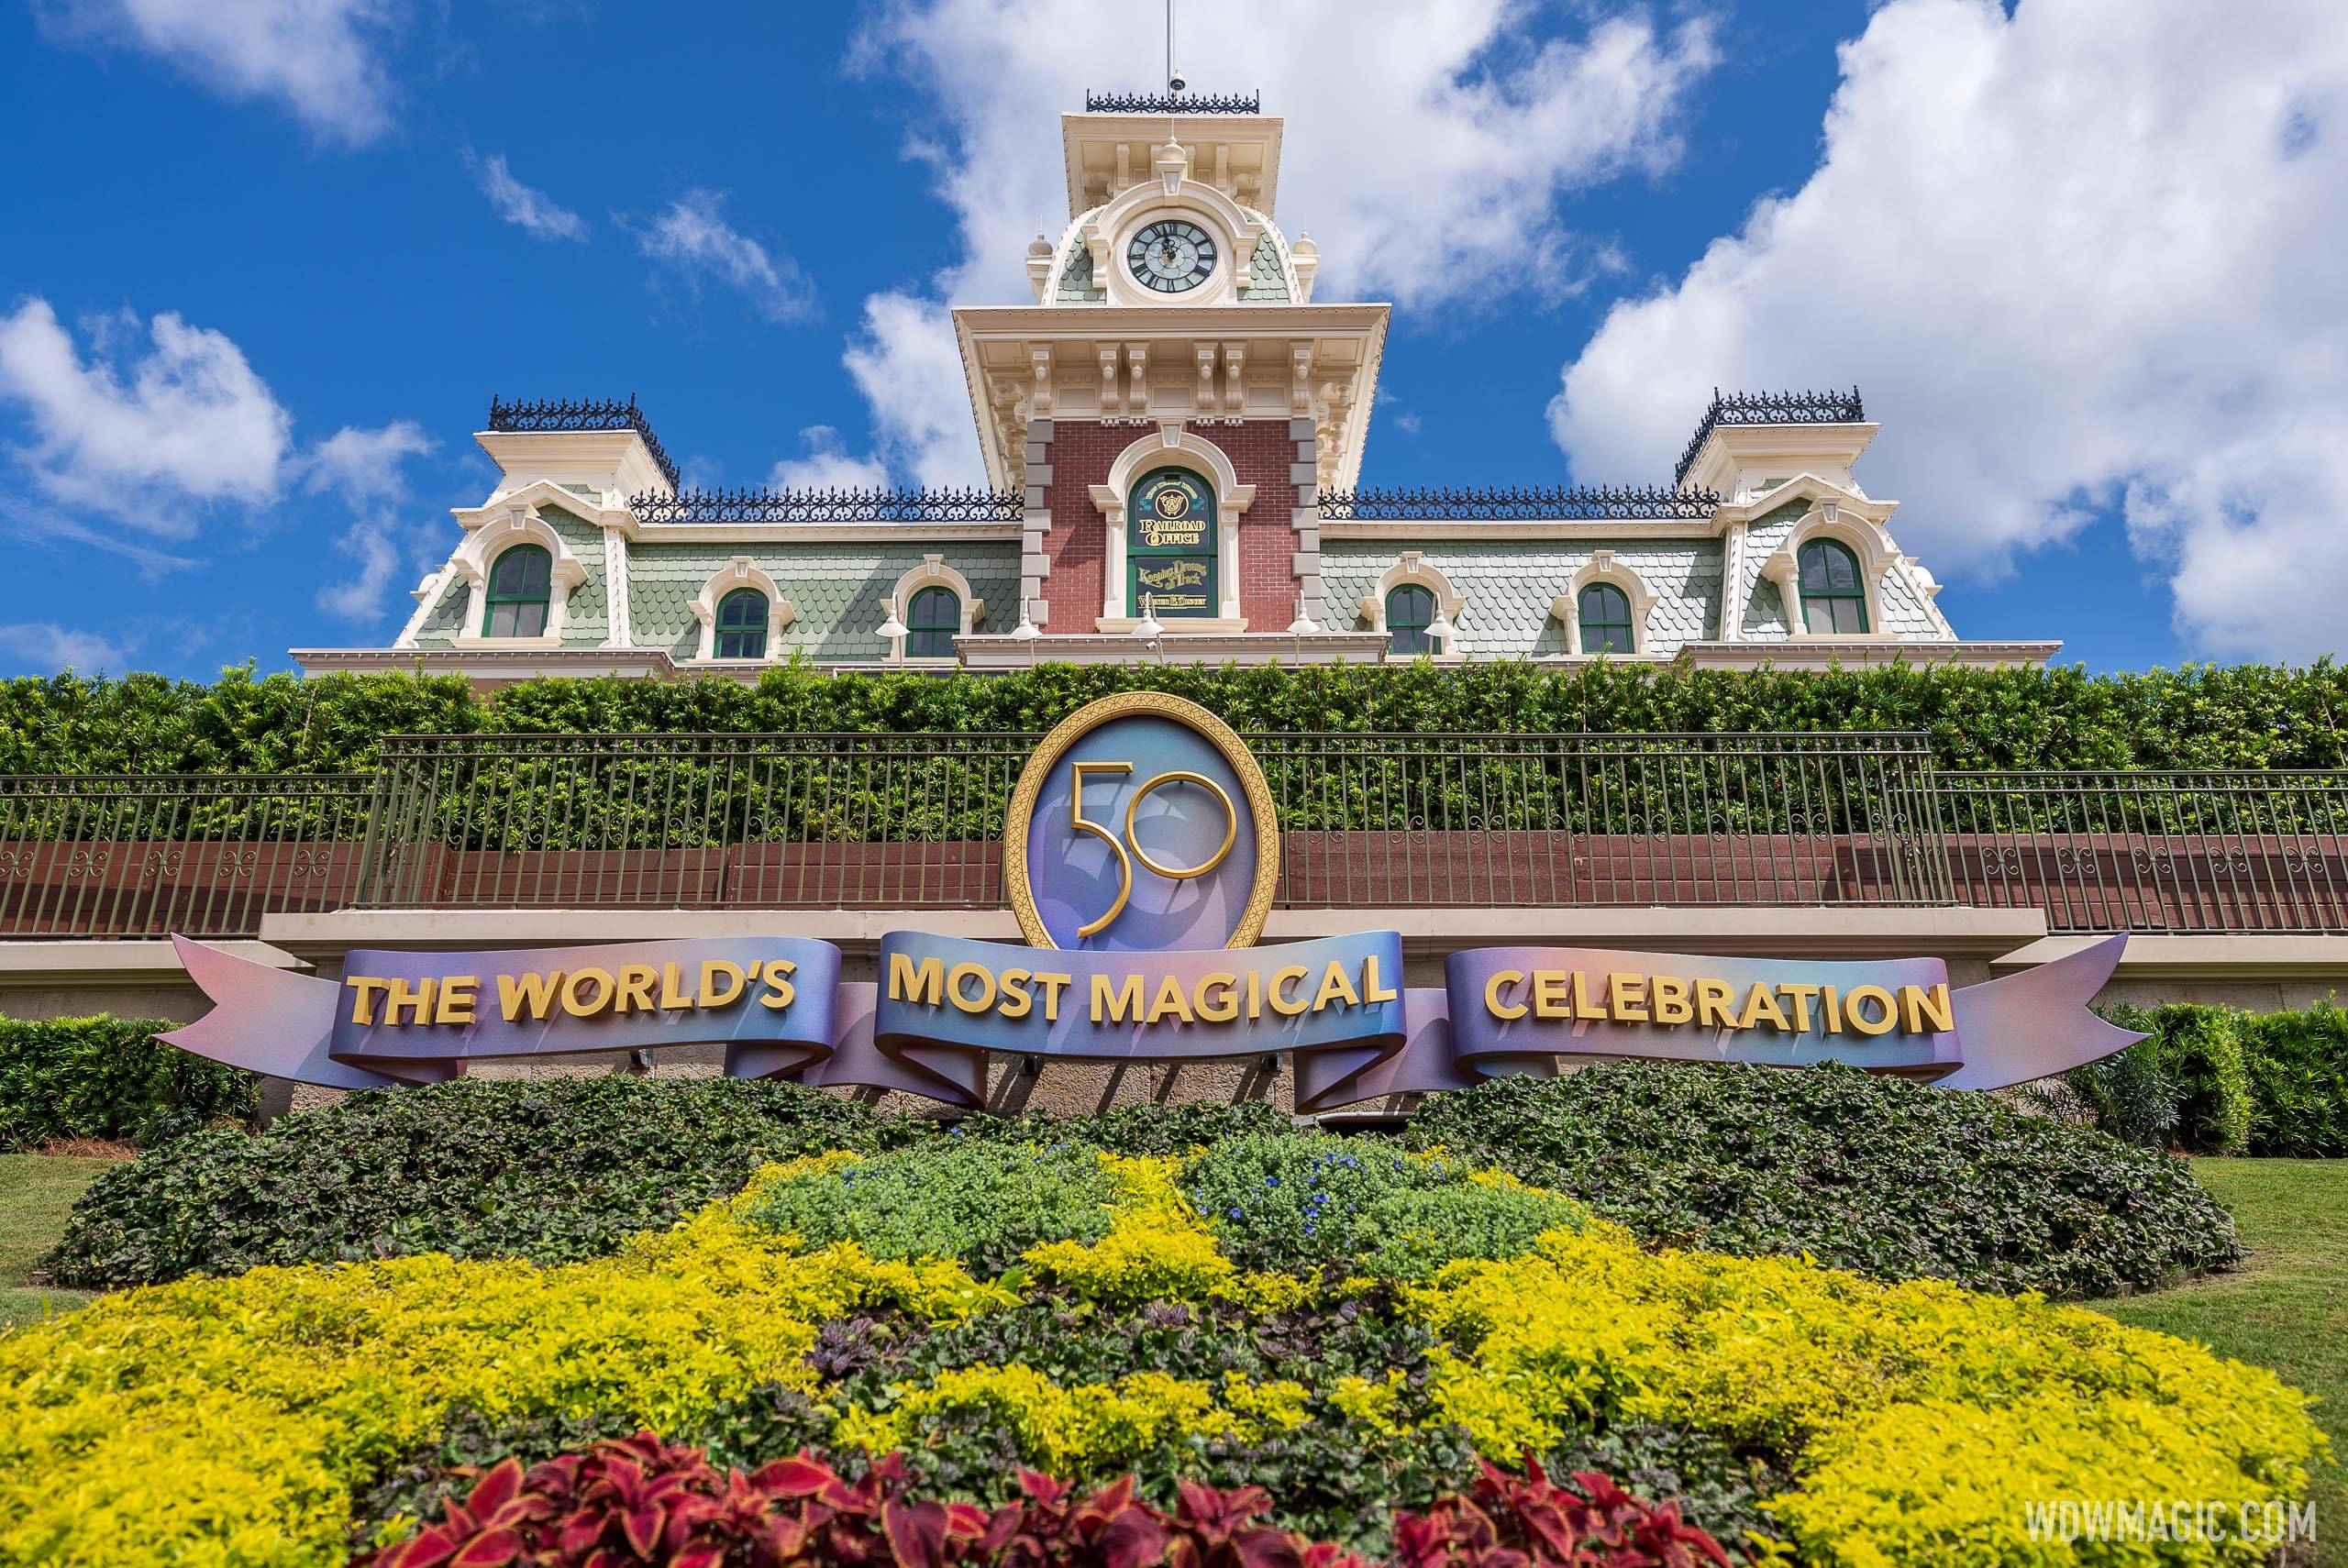 Walt Disney World 50th anniversary banner welcomes guests to the Magic Kingdom at the Main Street U.S.A. train station